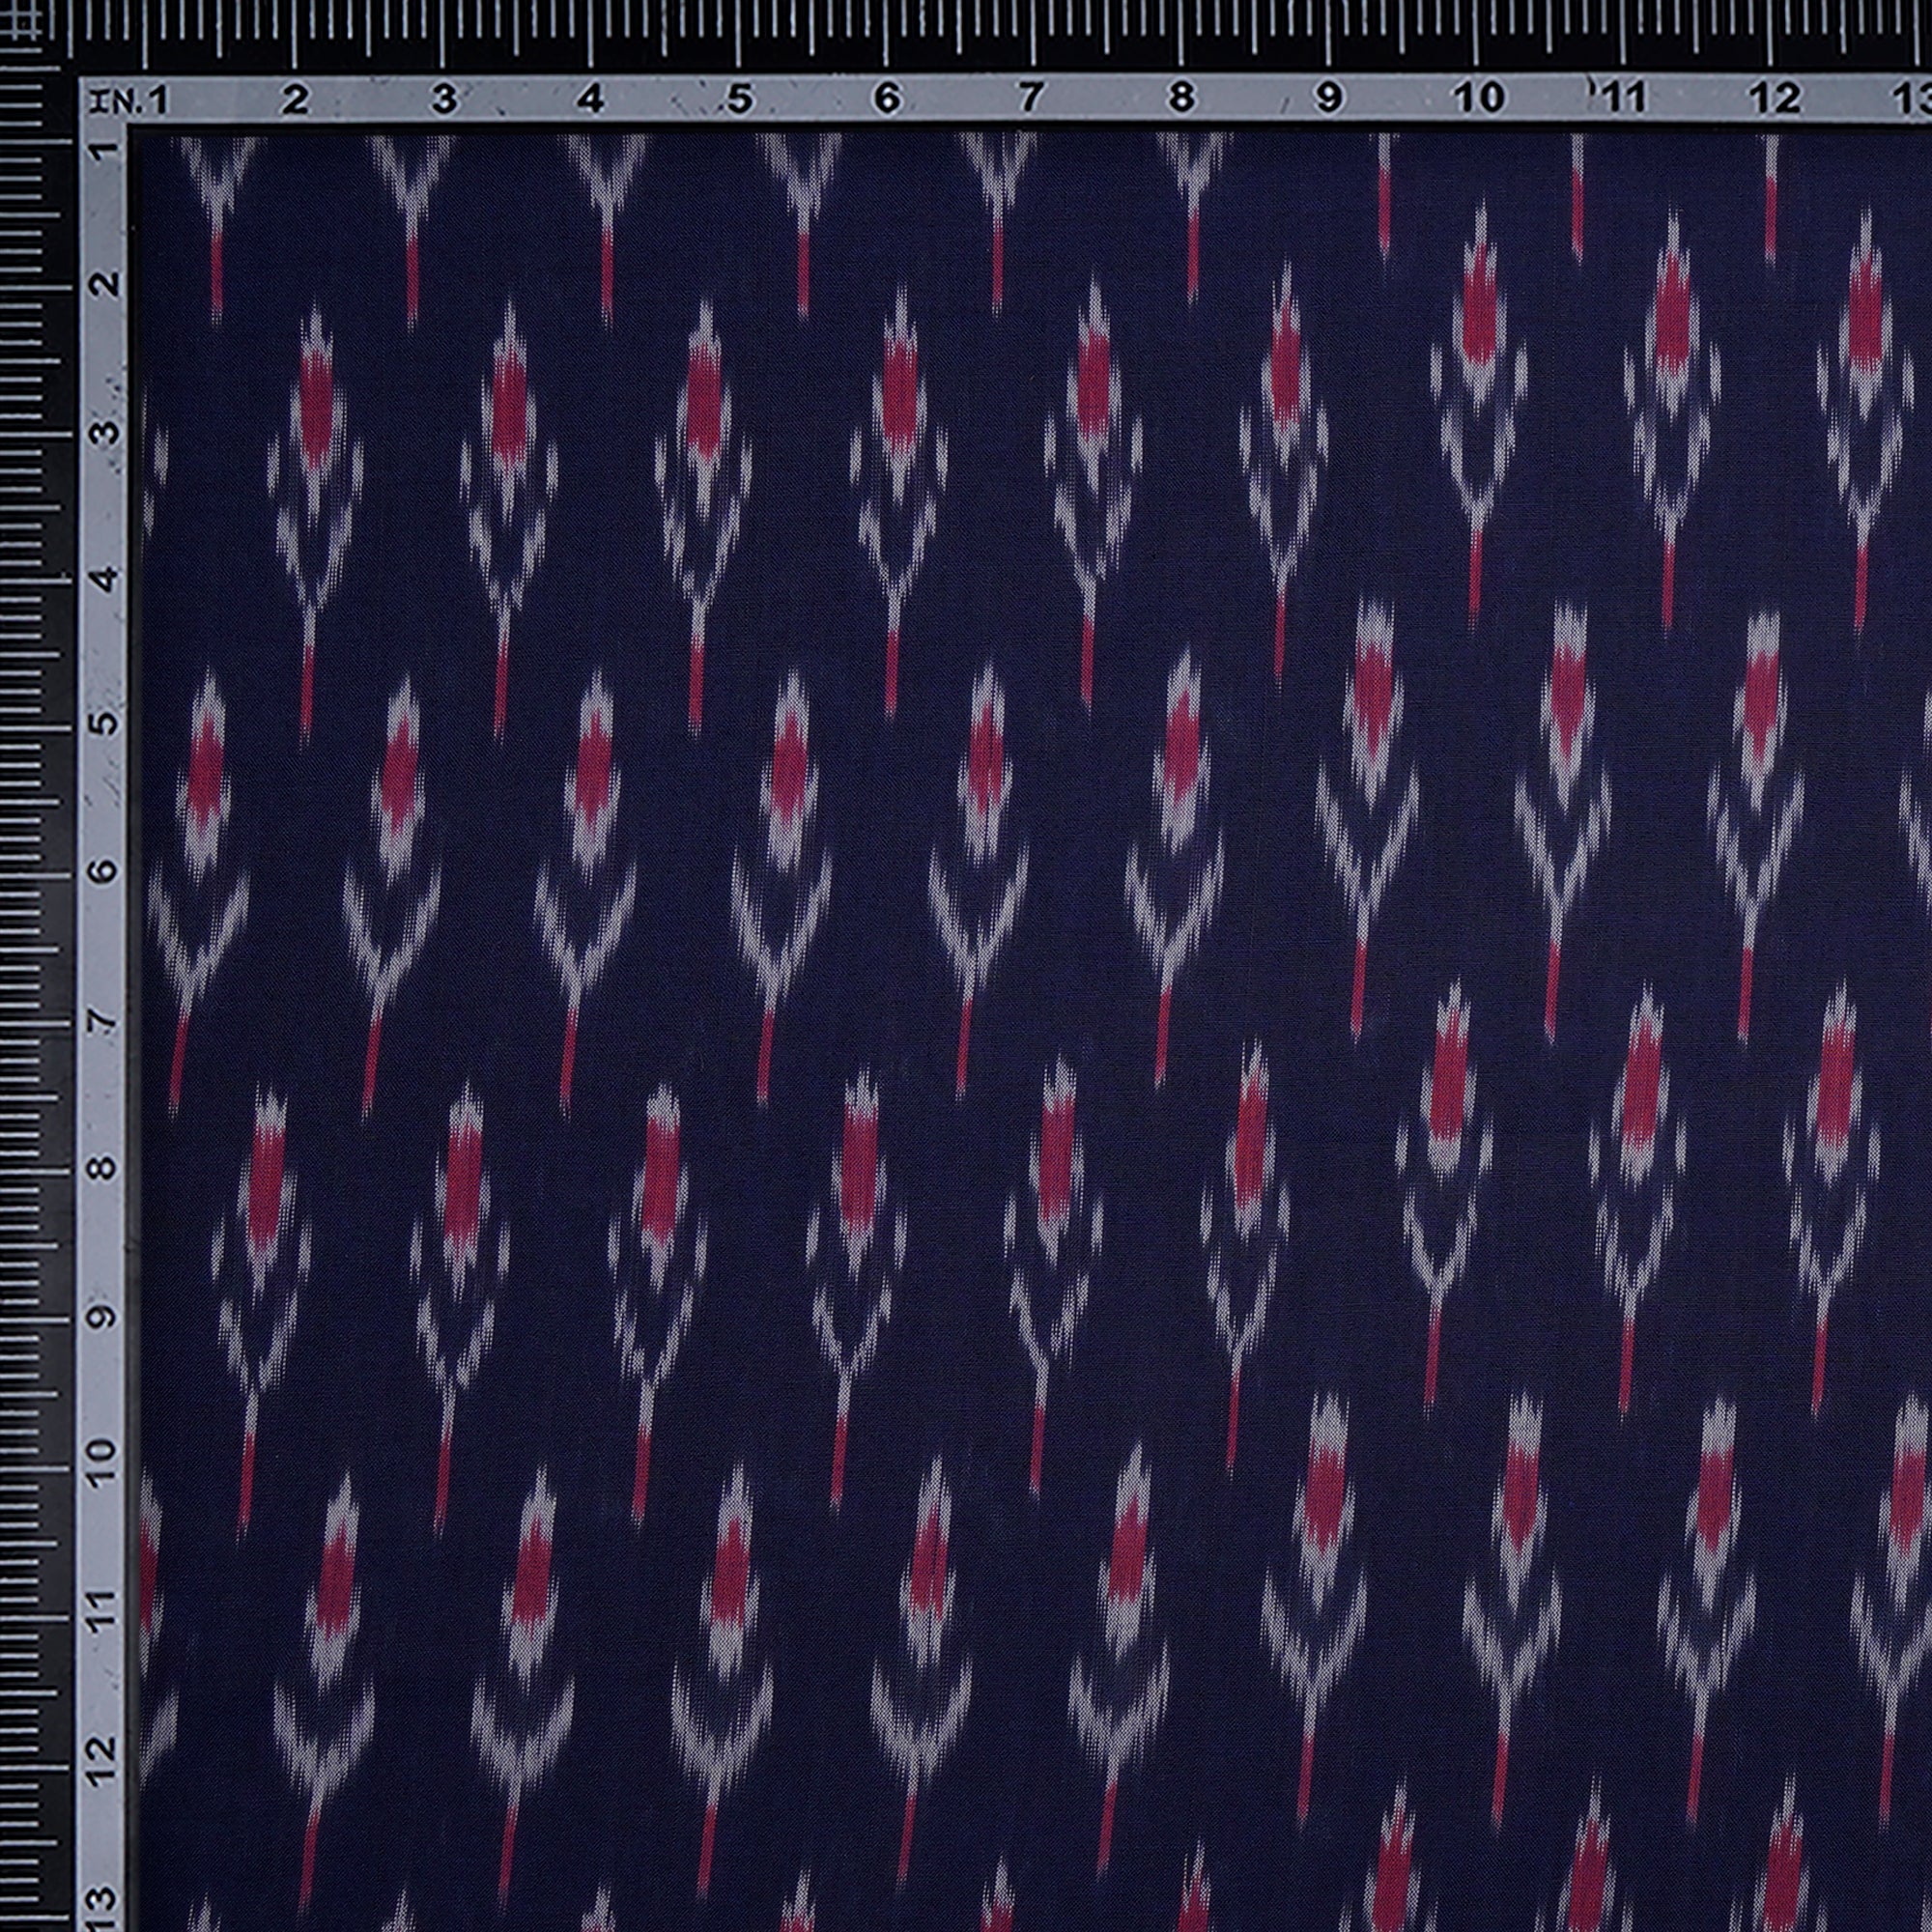 Voilet 2/120 Mercerized Washed Woven Ikat Cotton Fabric